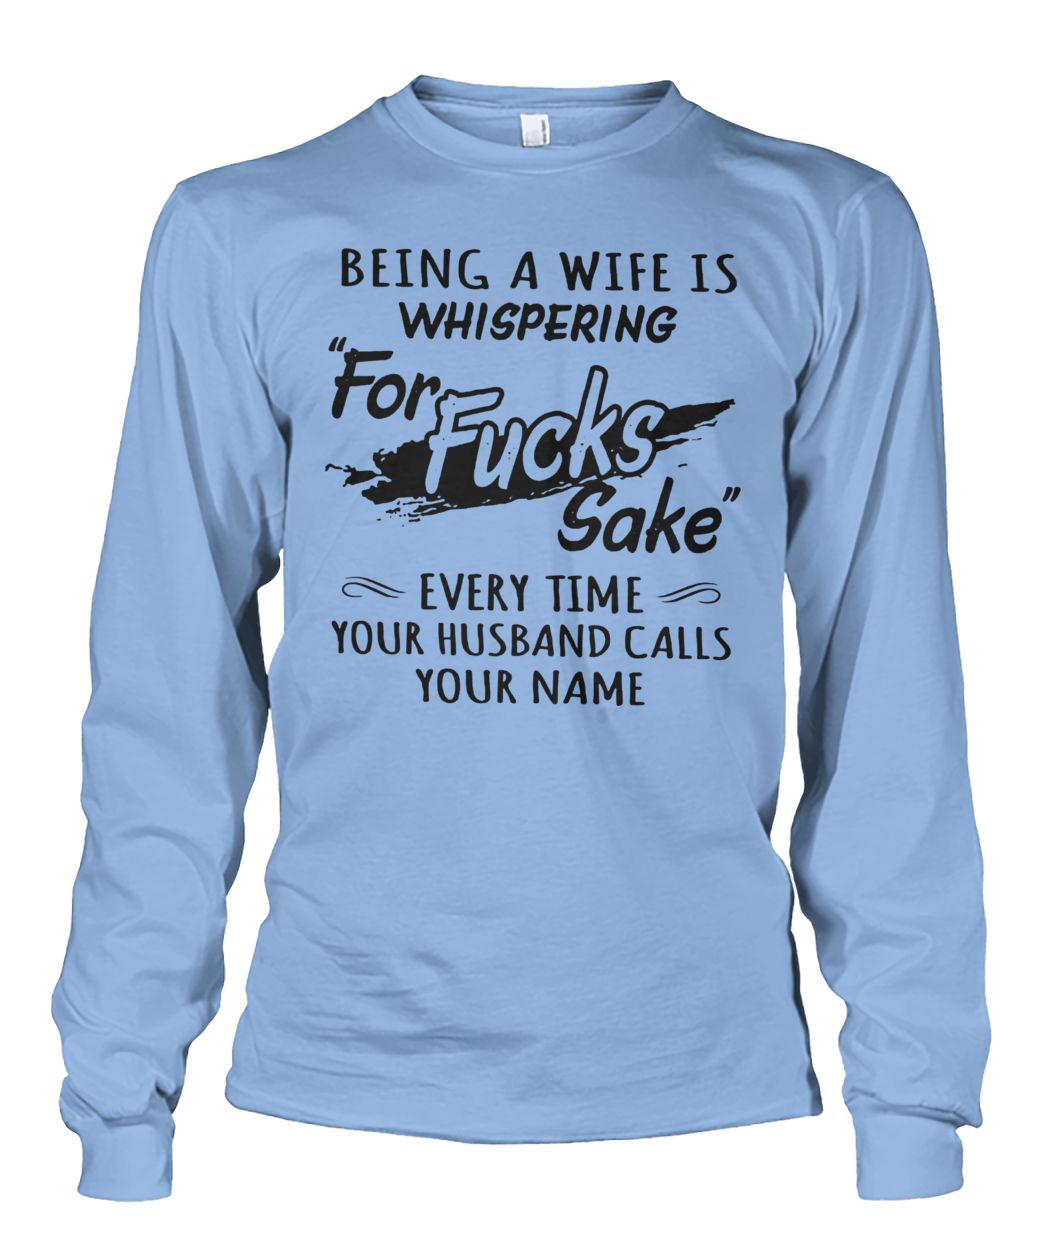 Being a wife is whispering for fucks sake every time your husband calls your name unisex long sleeve